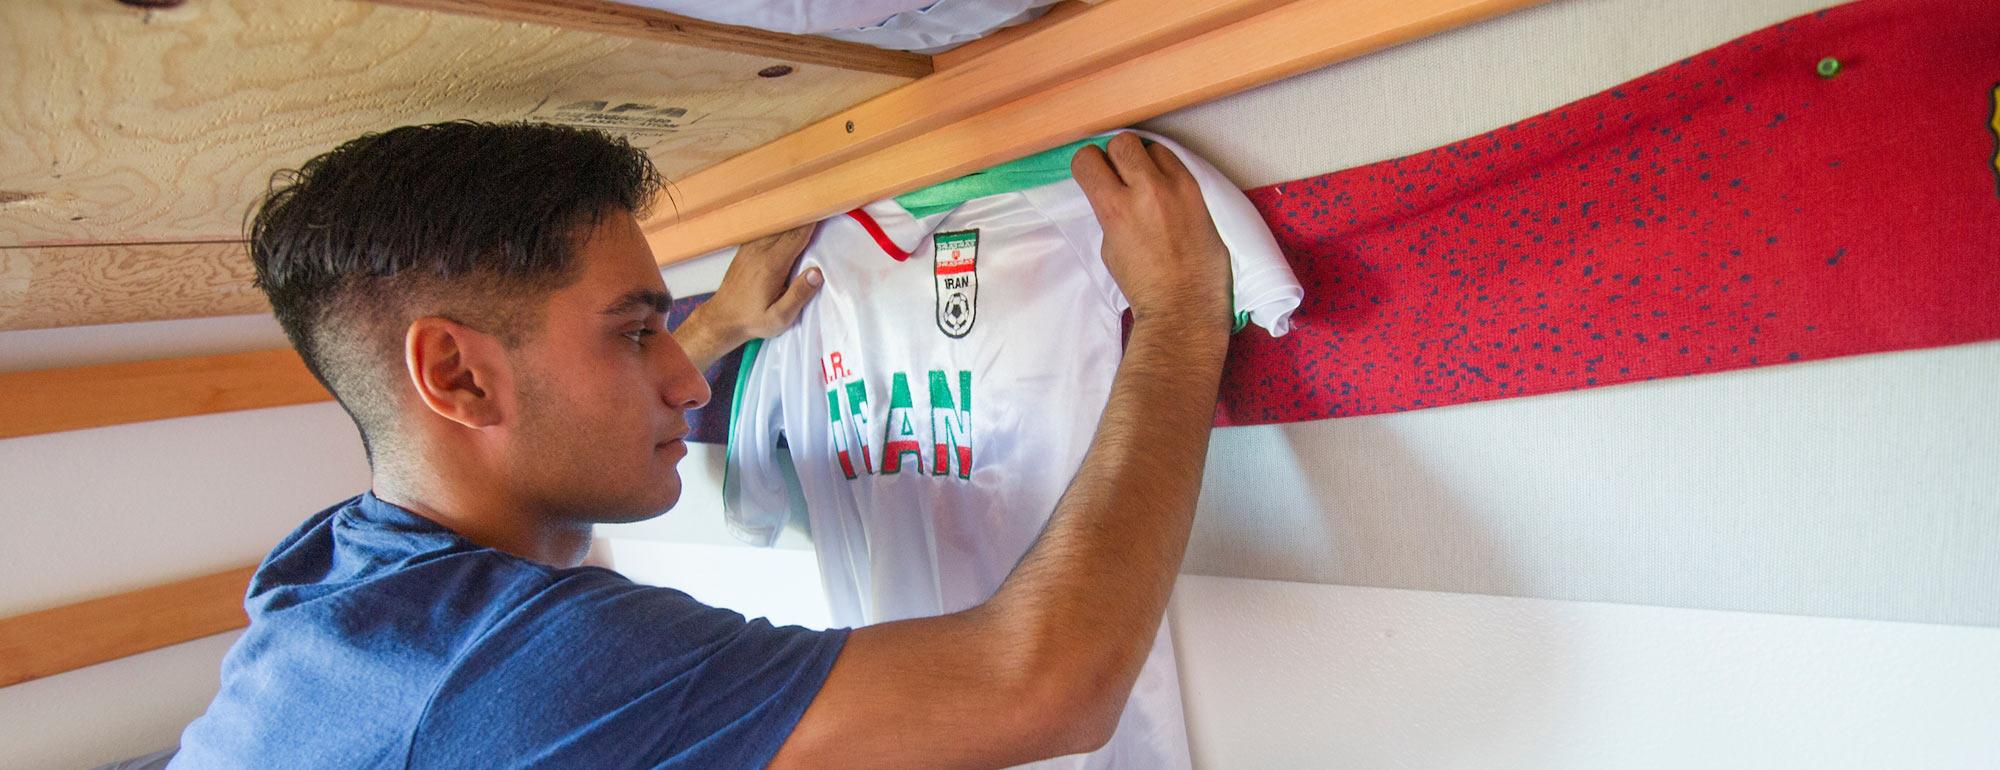 A student pins up an Iranian National Soccer team jersey in his dorm room